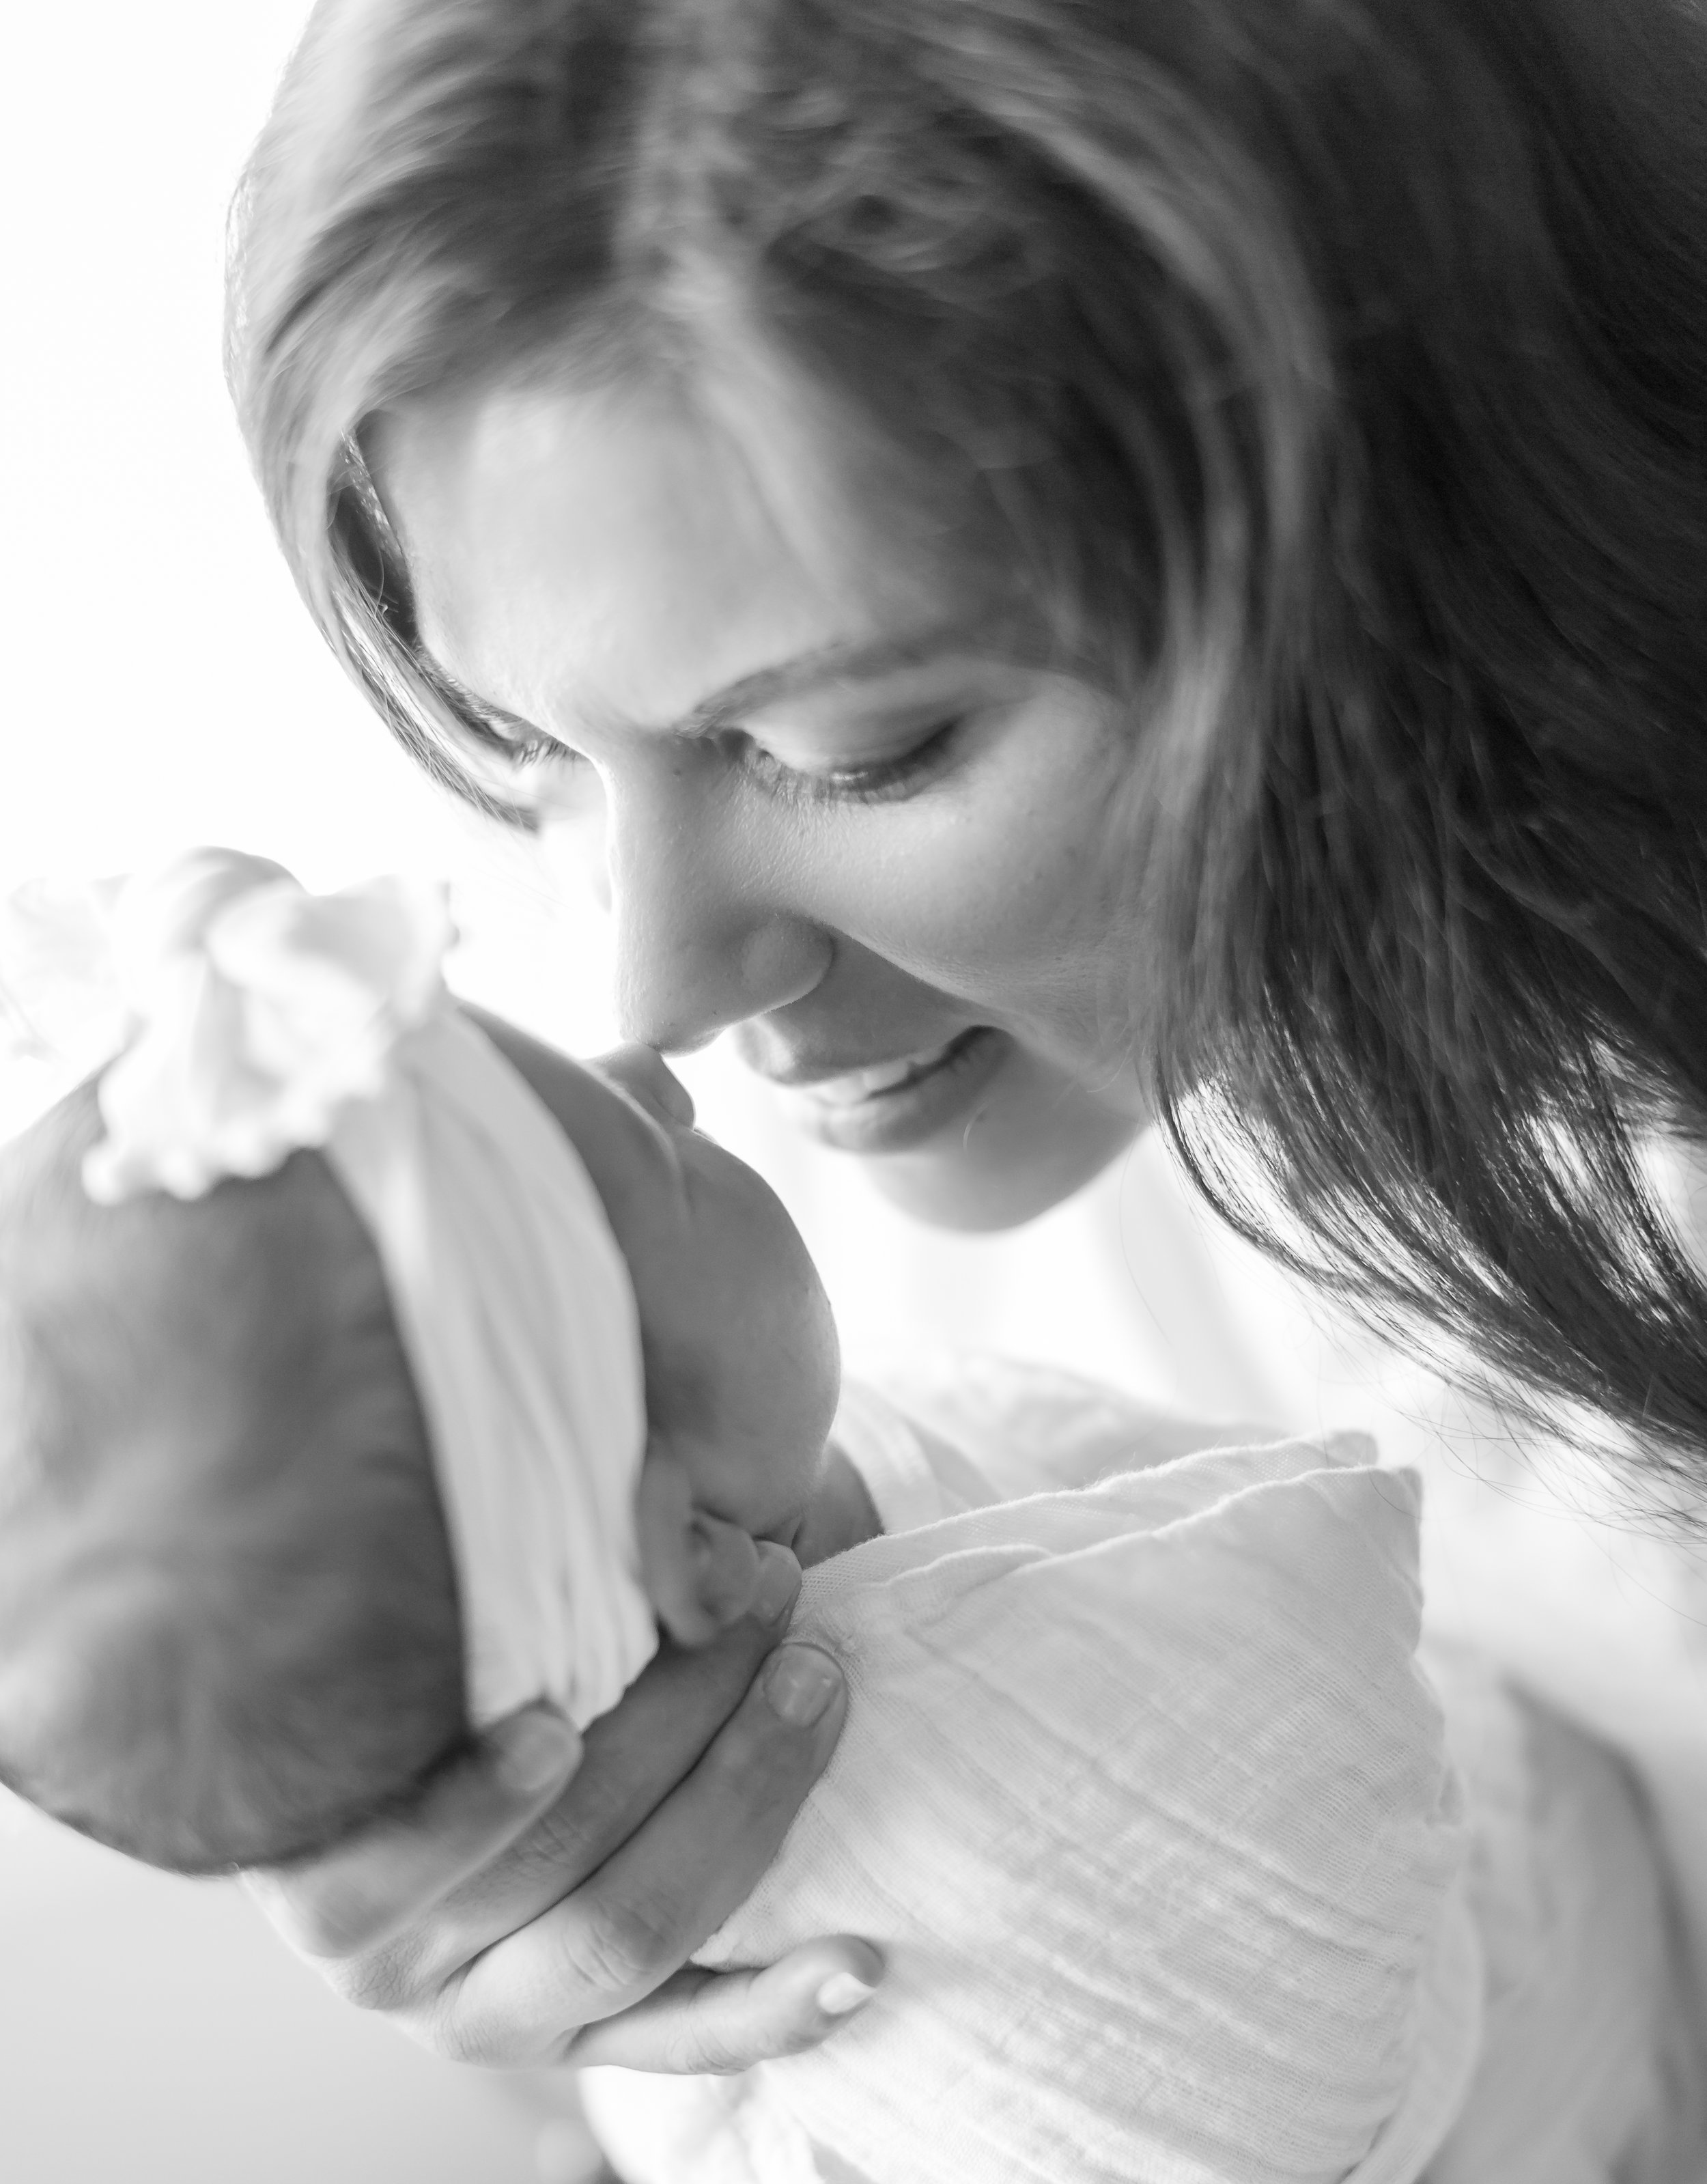 Tucson Newborn Photographer, Melissa Fritzsche Photography captures Mom and her newborn daughter nose to nose. Sweet newborn candid moments.